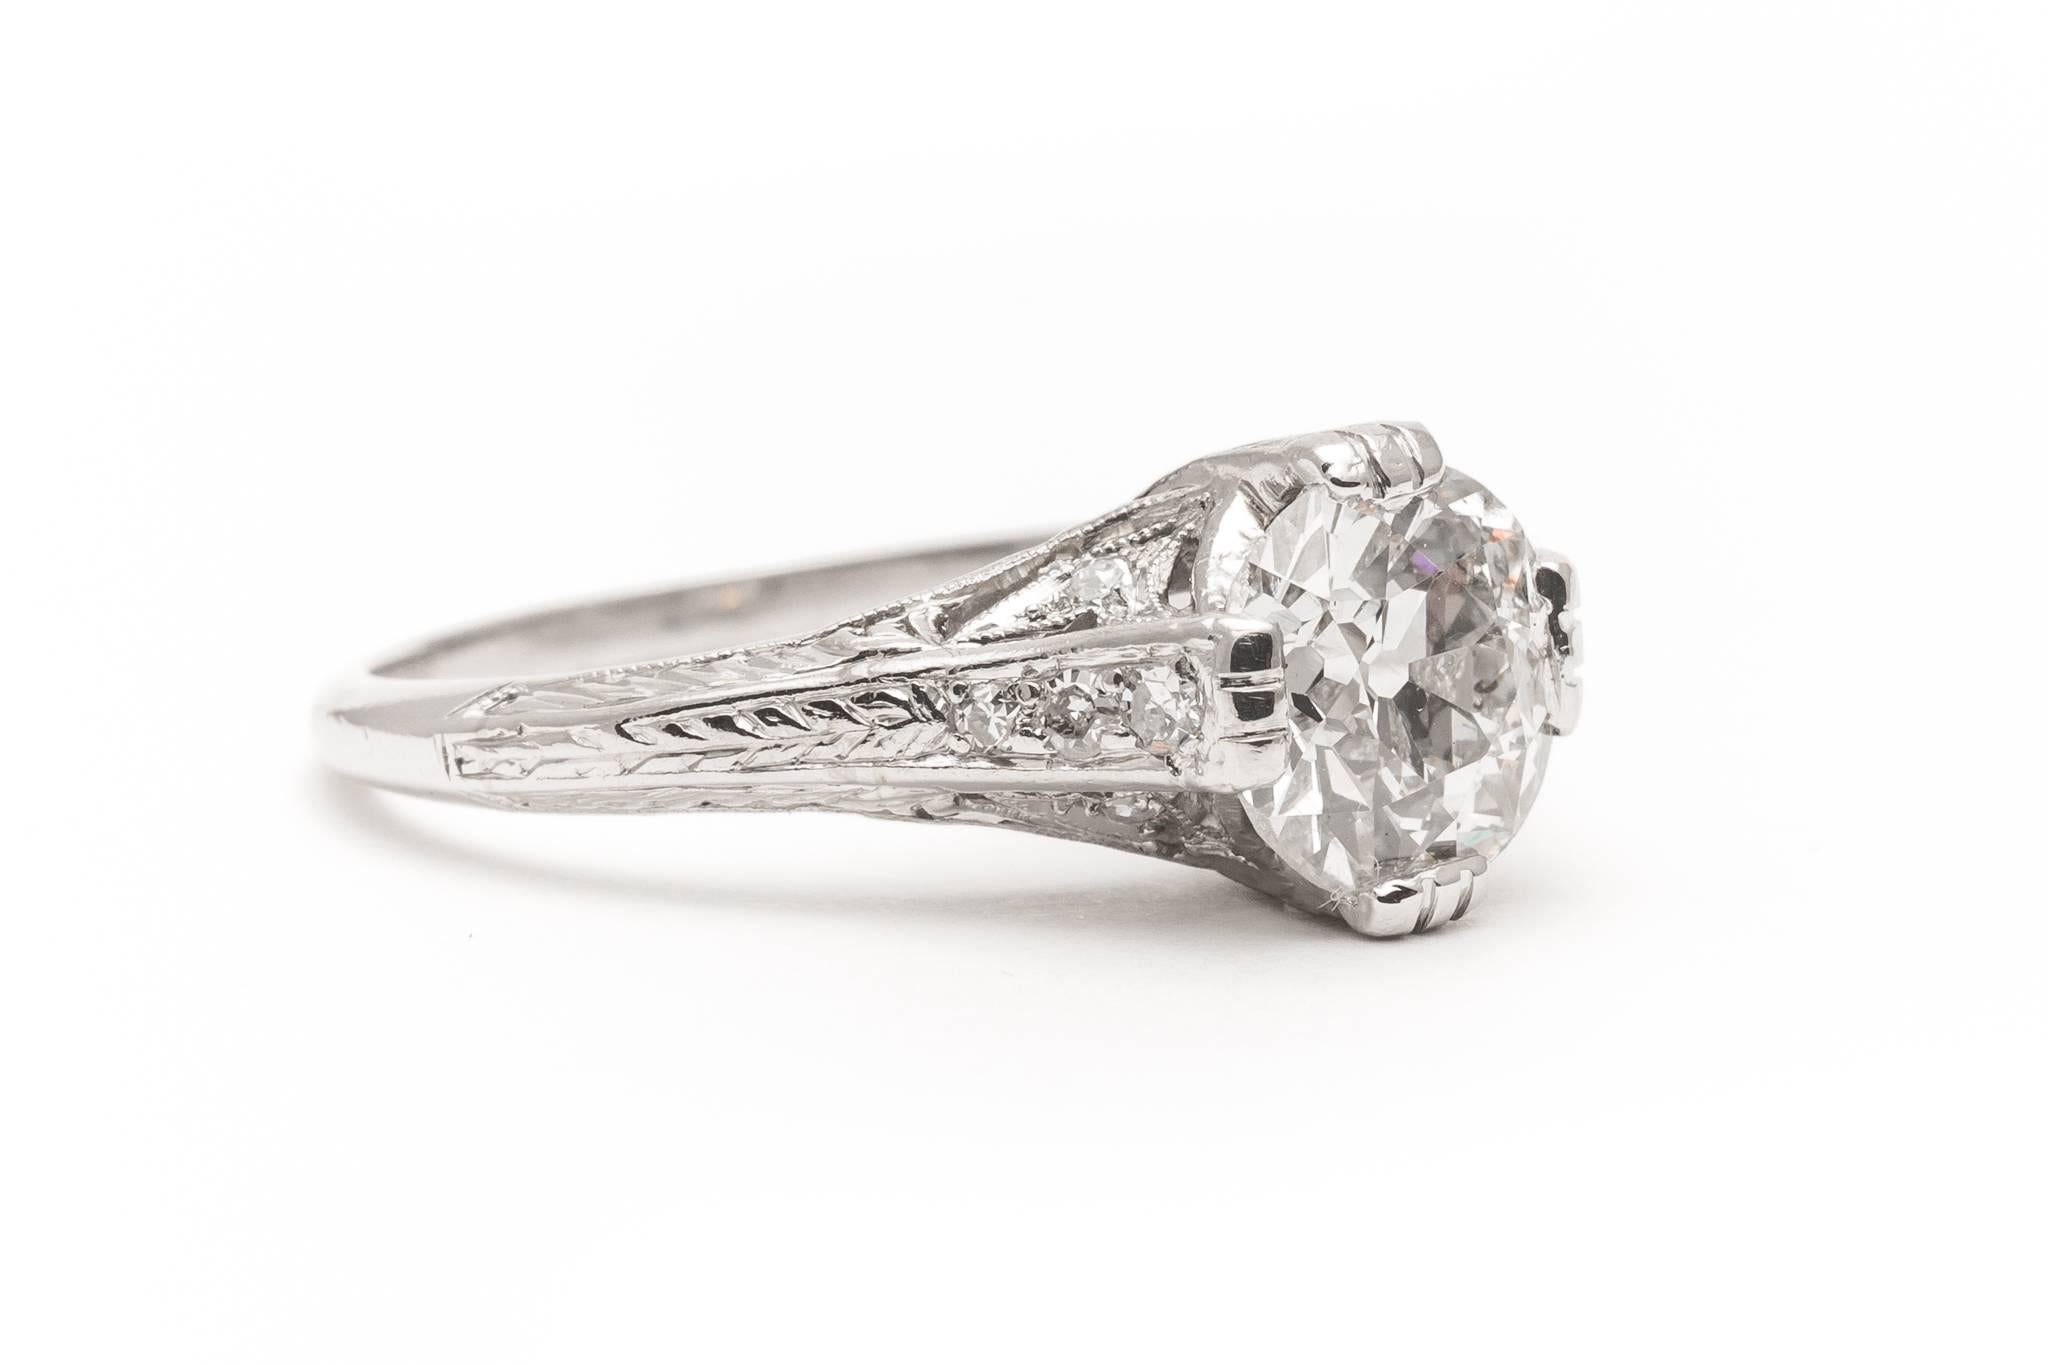 A beautiful original art deco period diamond engagement ring set in luxurious platinum.  Centered by a beautiful antique European cut diamond this ring features a fantastic hand engraved floral mounting in luxurious platinum.

Weighing in at 1.75